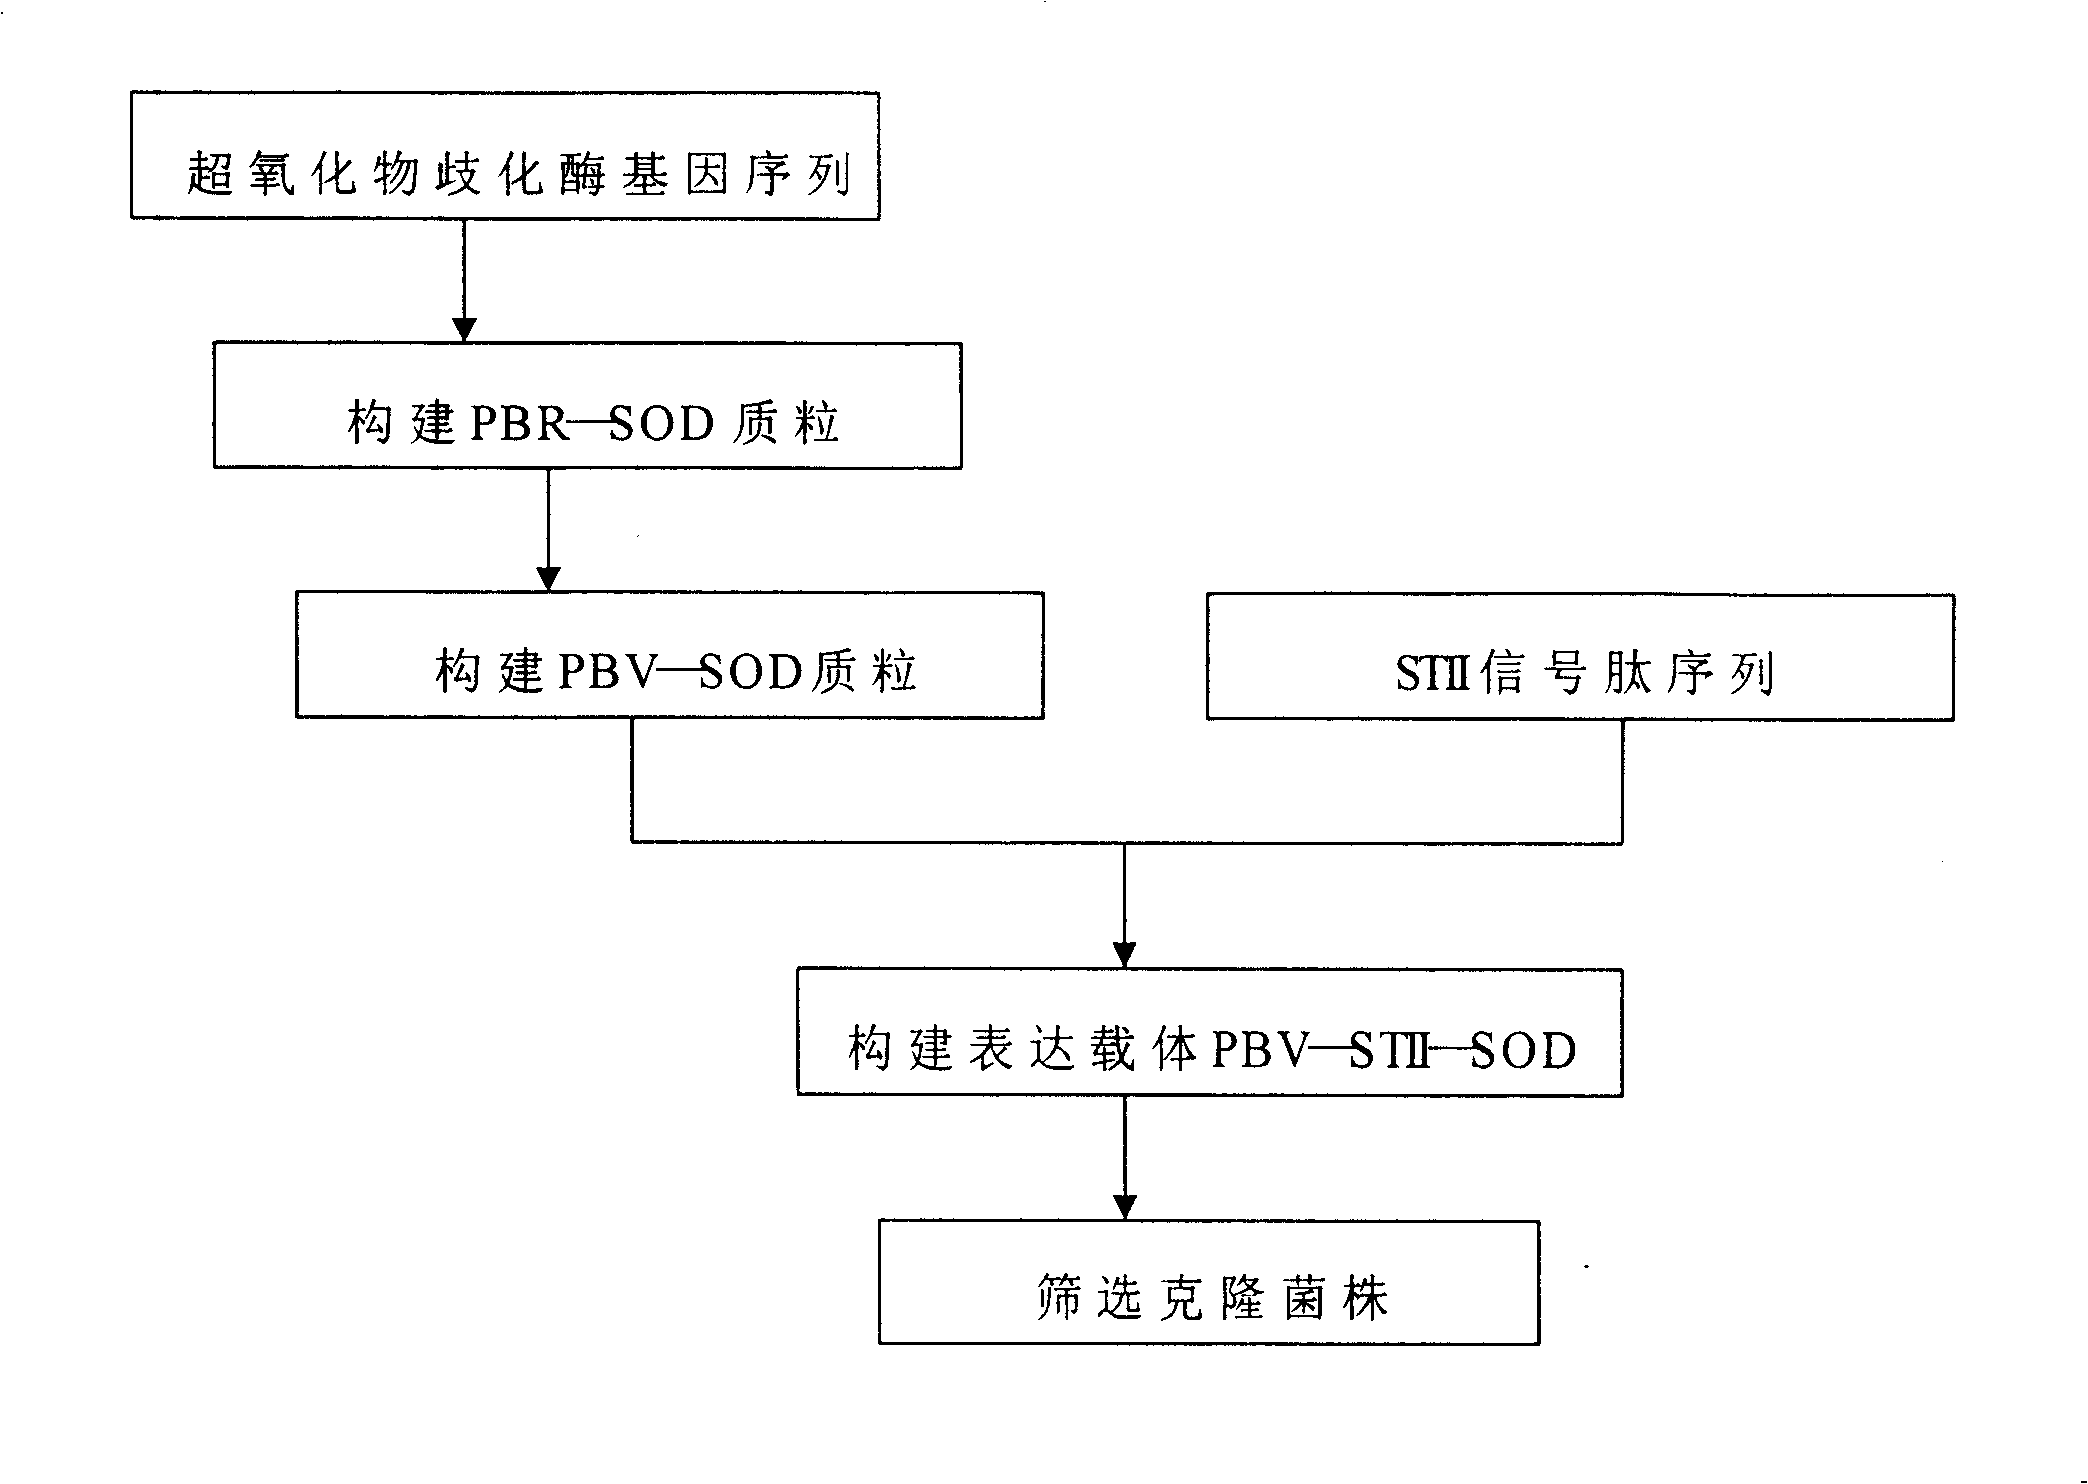 Technique for producing gene rHu(Cu/Zn-SOD) with one-step method